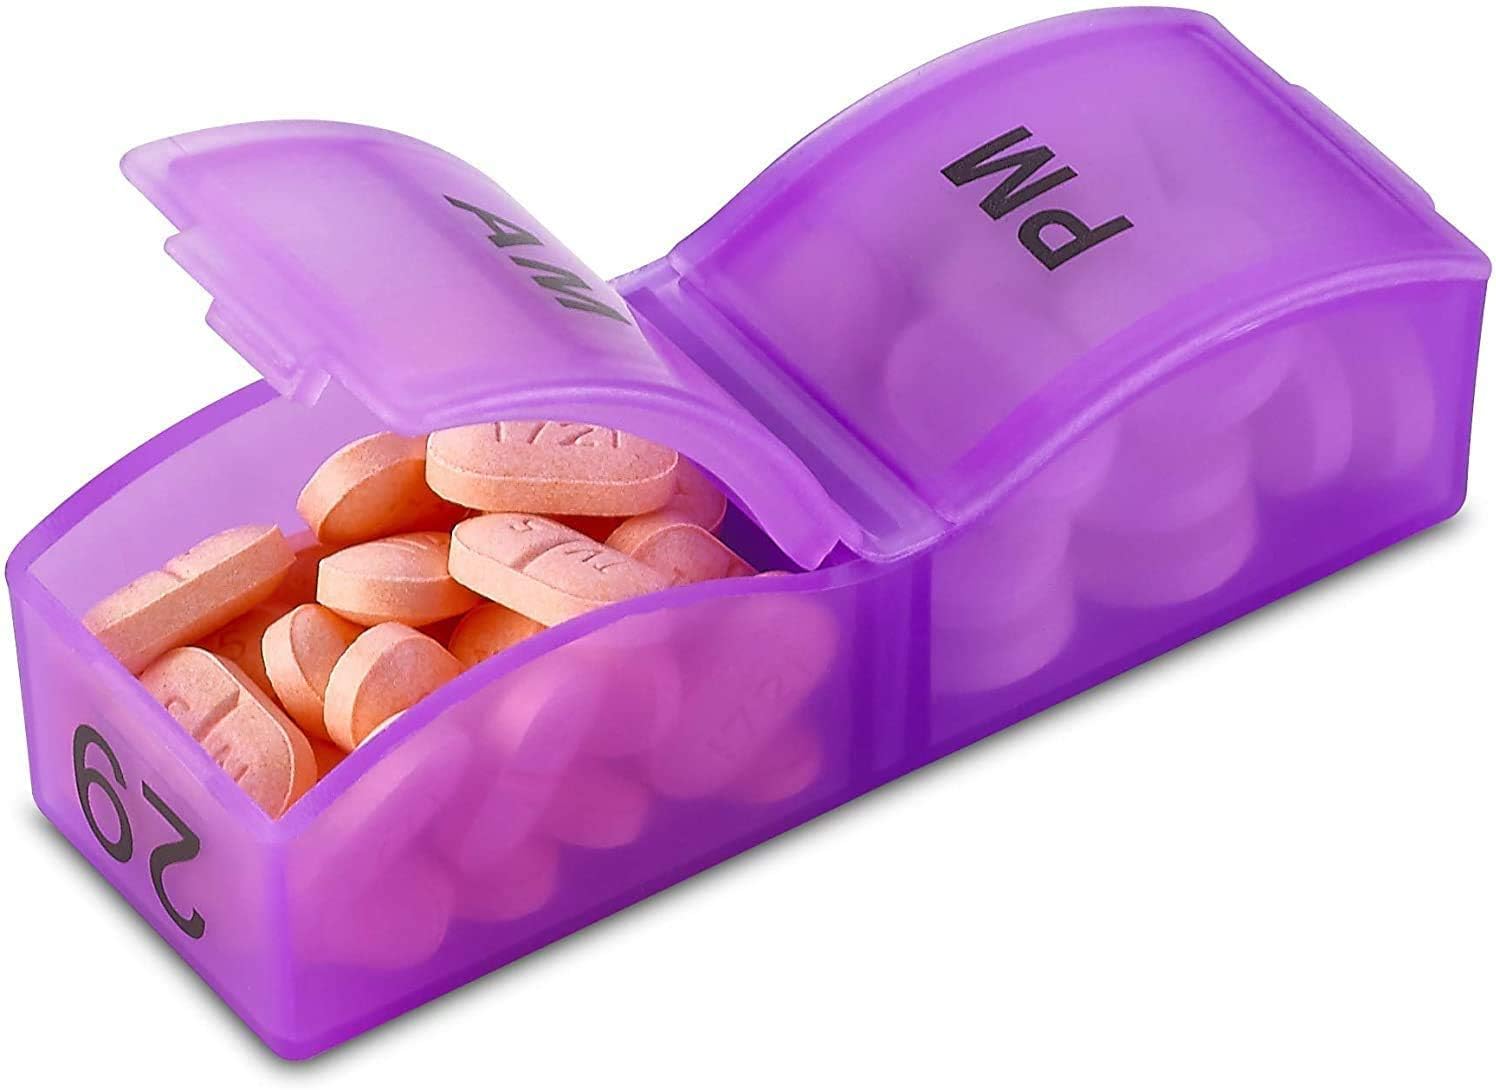 Must Have Keychain Pill Organizer to Keep Medications Handy This Year